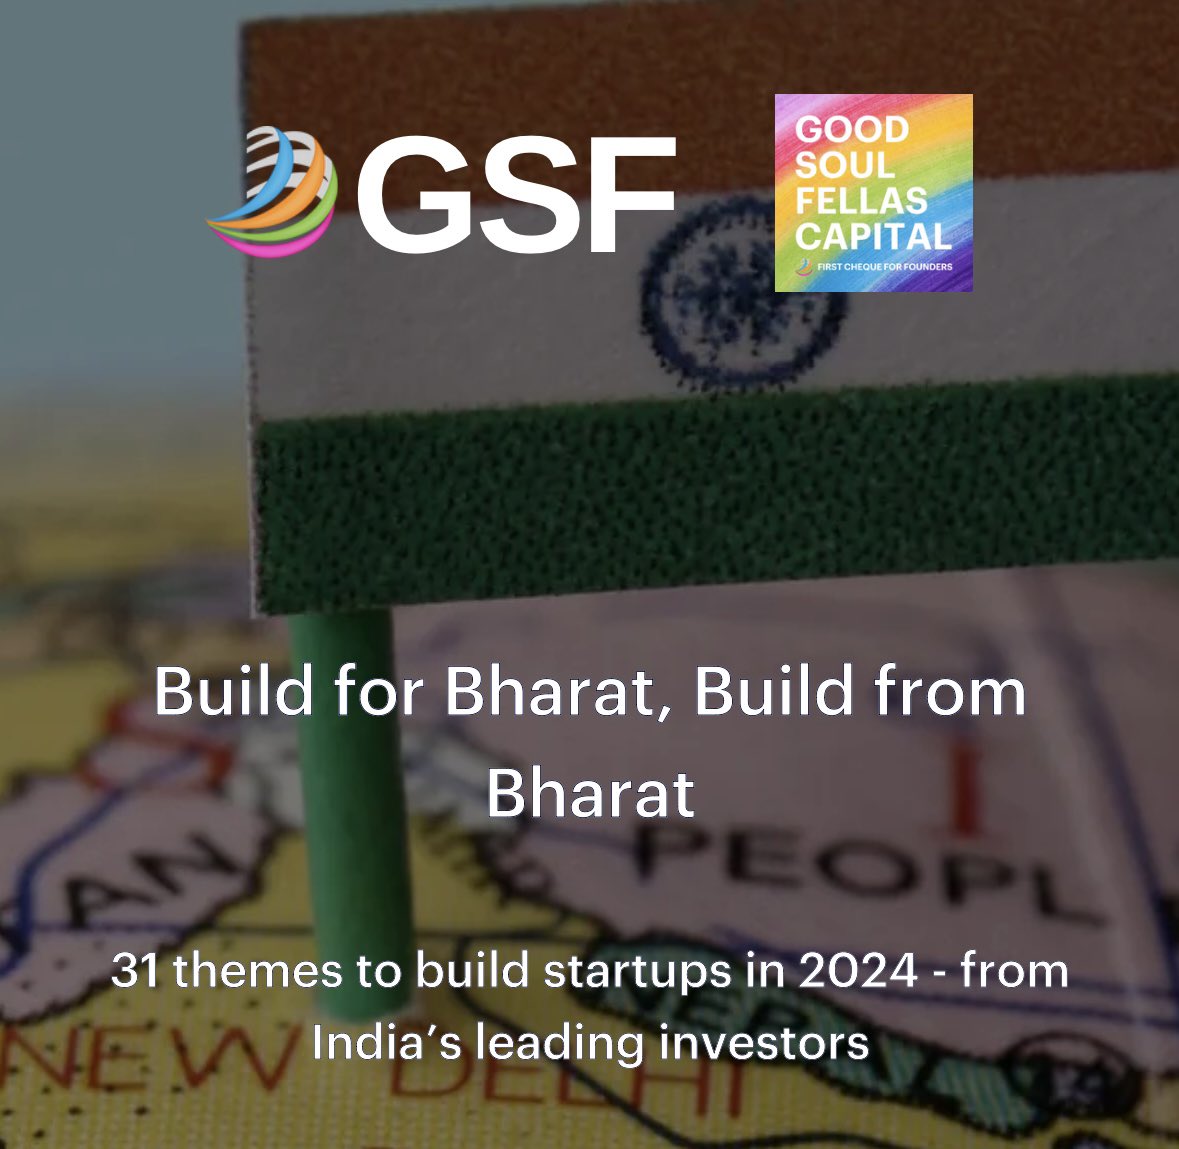 Build For Bharat; Build From Bharat We requested leading investors in India to articulate one theme each on which startups should be built in 🇮🇳 in 2024 Here is a list of 31 themes that emerged : build.gsfindia.com 1-16 Themes:- 1. AI in Manufacturing, @prakharkhanduja